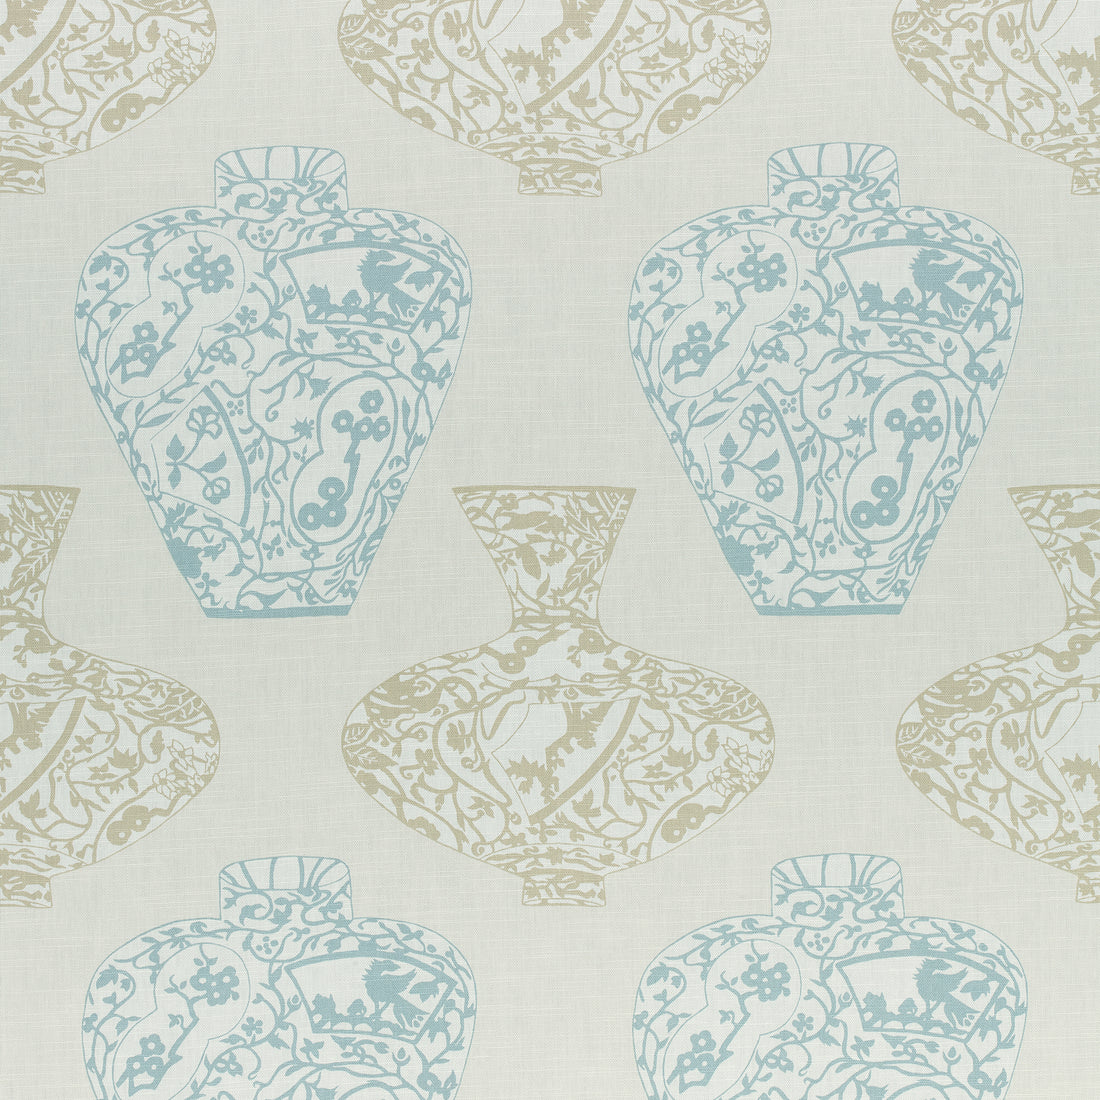 Imari Vase fabric in aqua and beige color - pattern number F913122 - by Thibaut in the Summer House collection